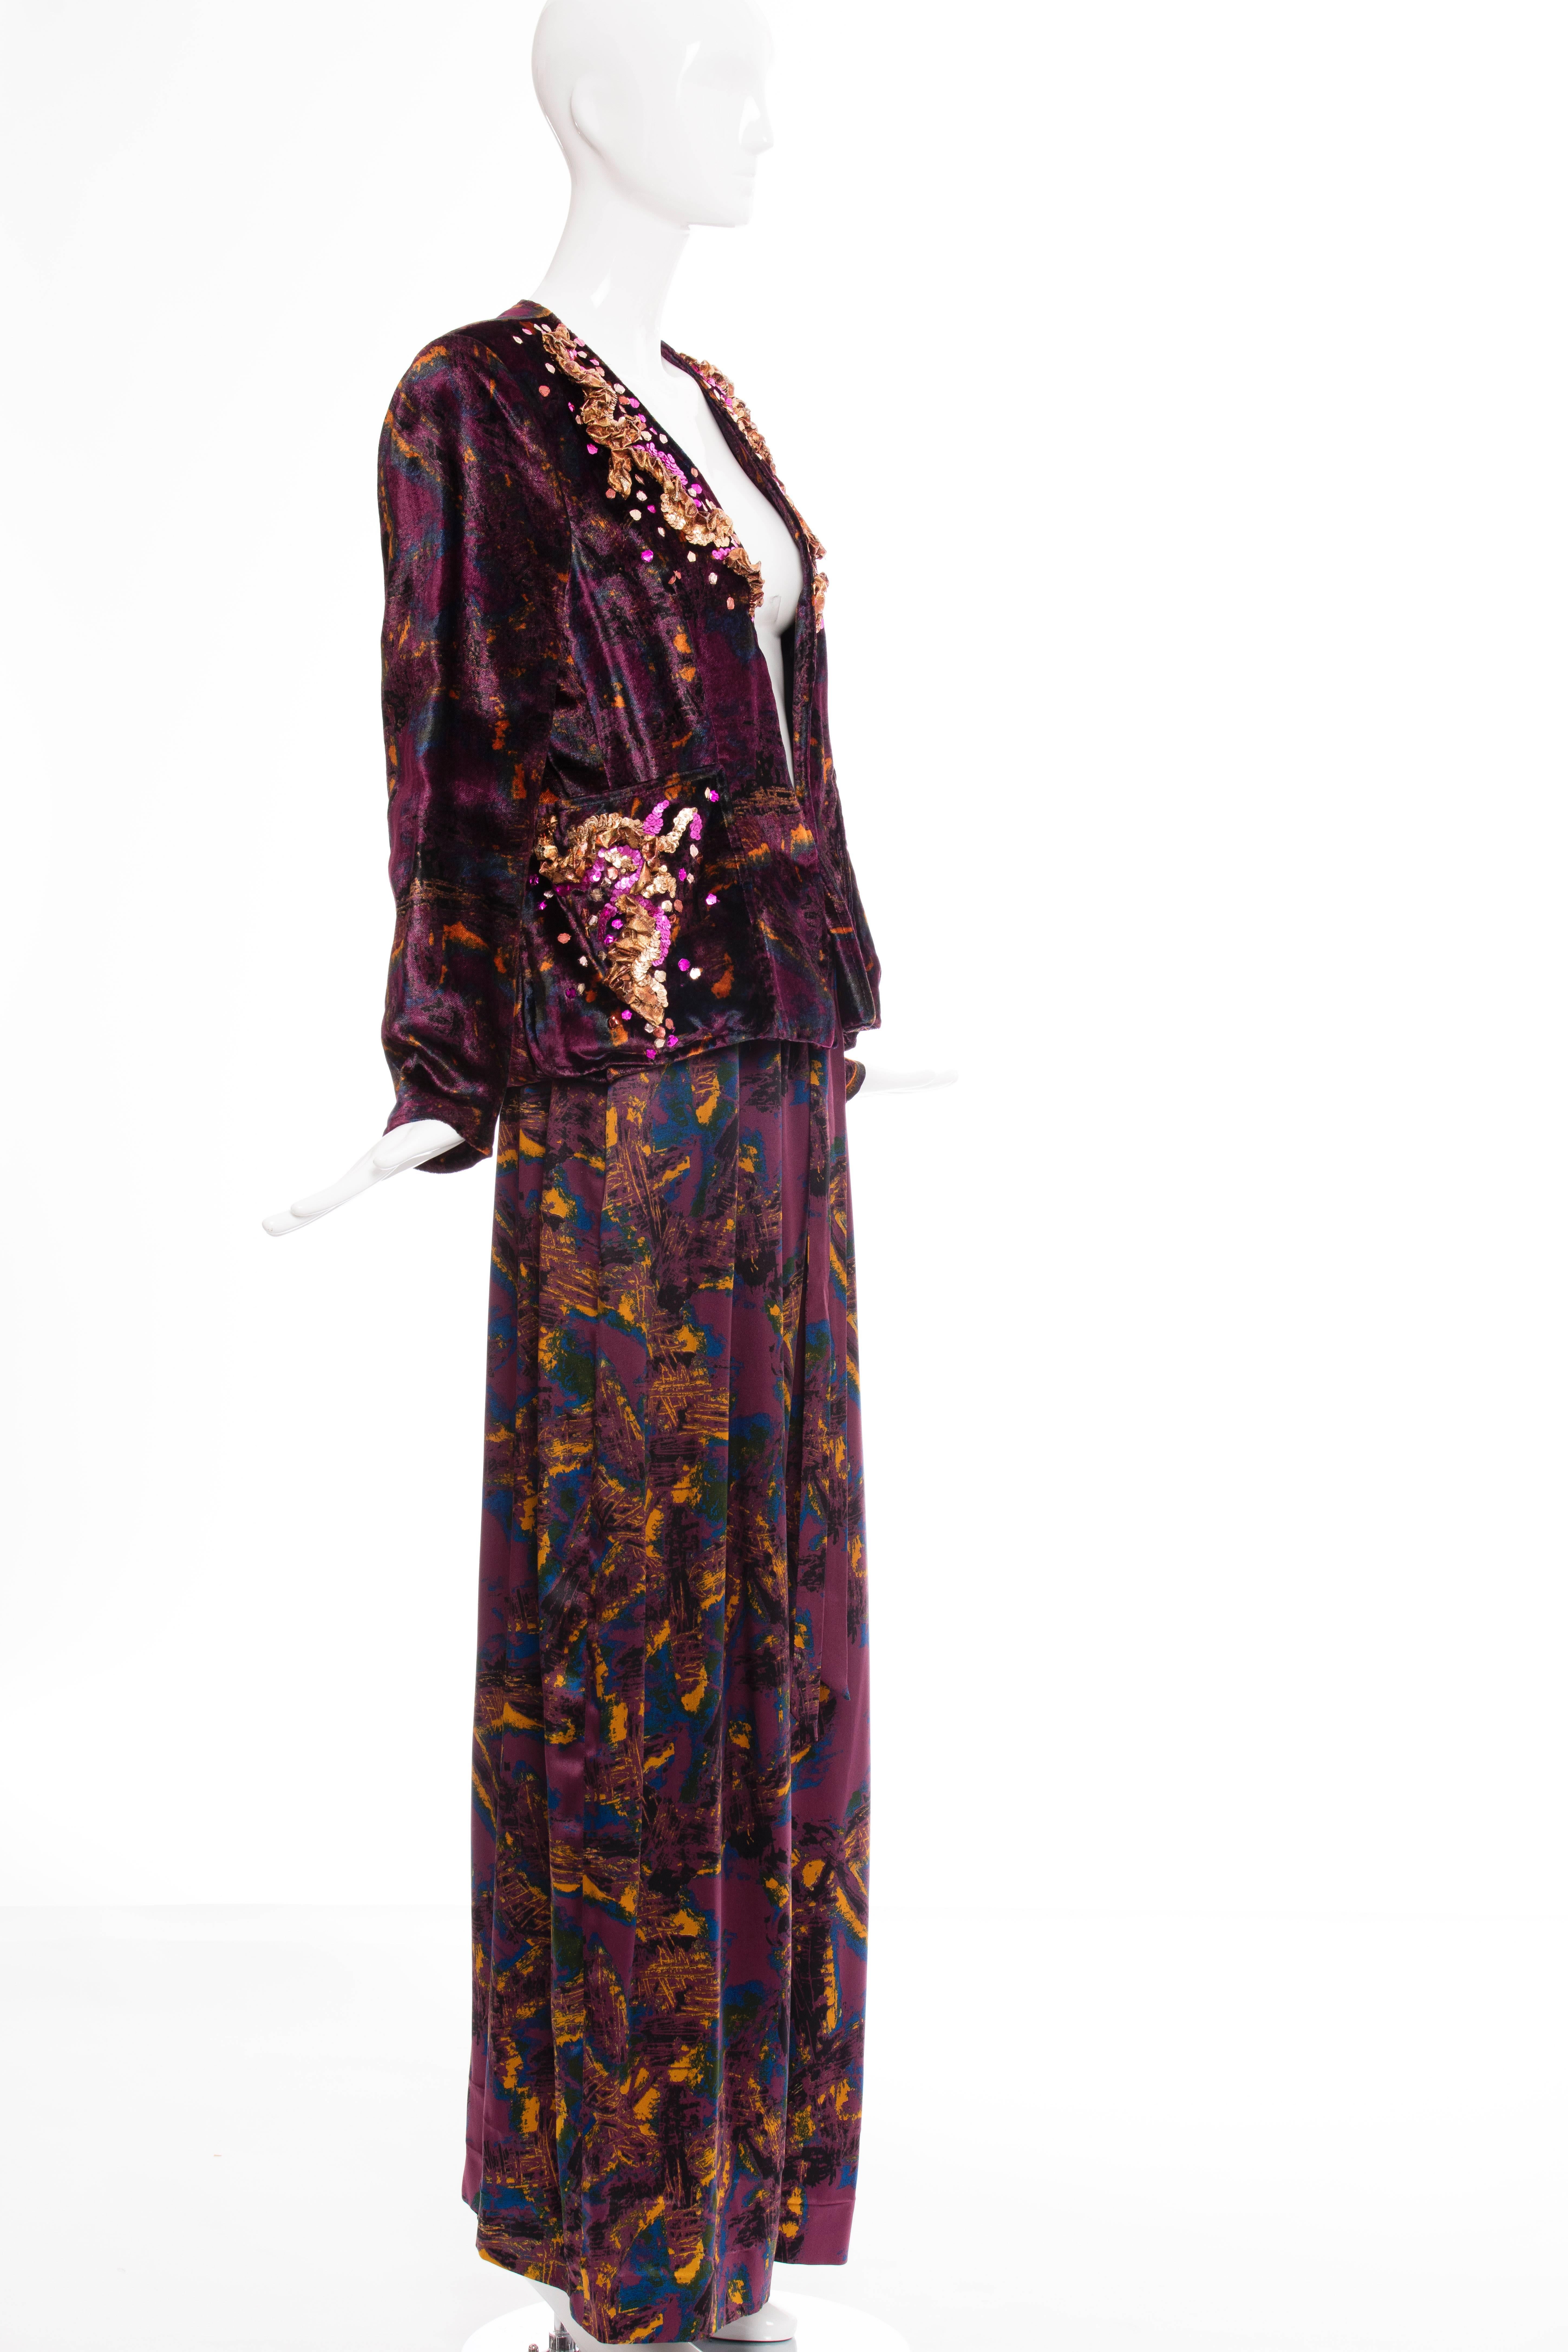 Christian Lacroix, circa 1980's, palazzo pant suit. The printed velvet jacket has two front pockets, embellished with sequins and fully lined. The printed silk charmeuse palazzo pants has two front pockets, tie front and hook and eye closure.

FR.